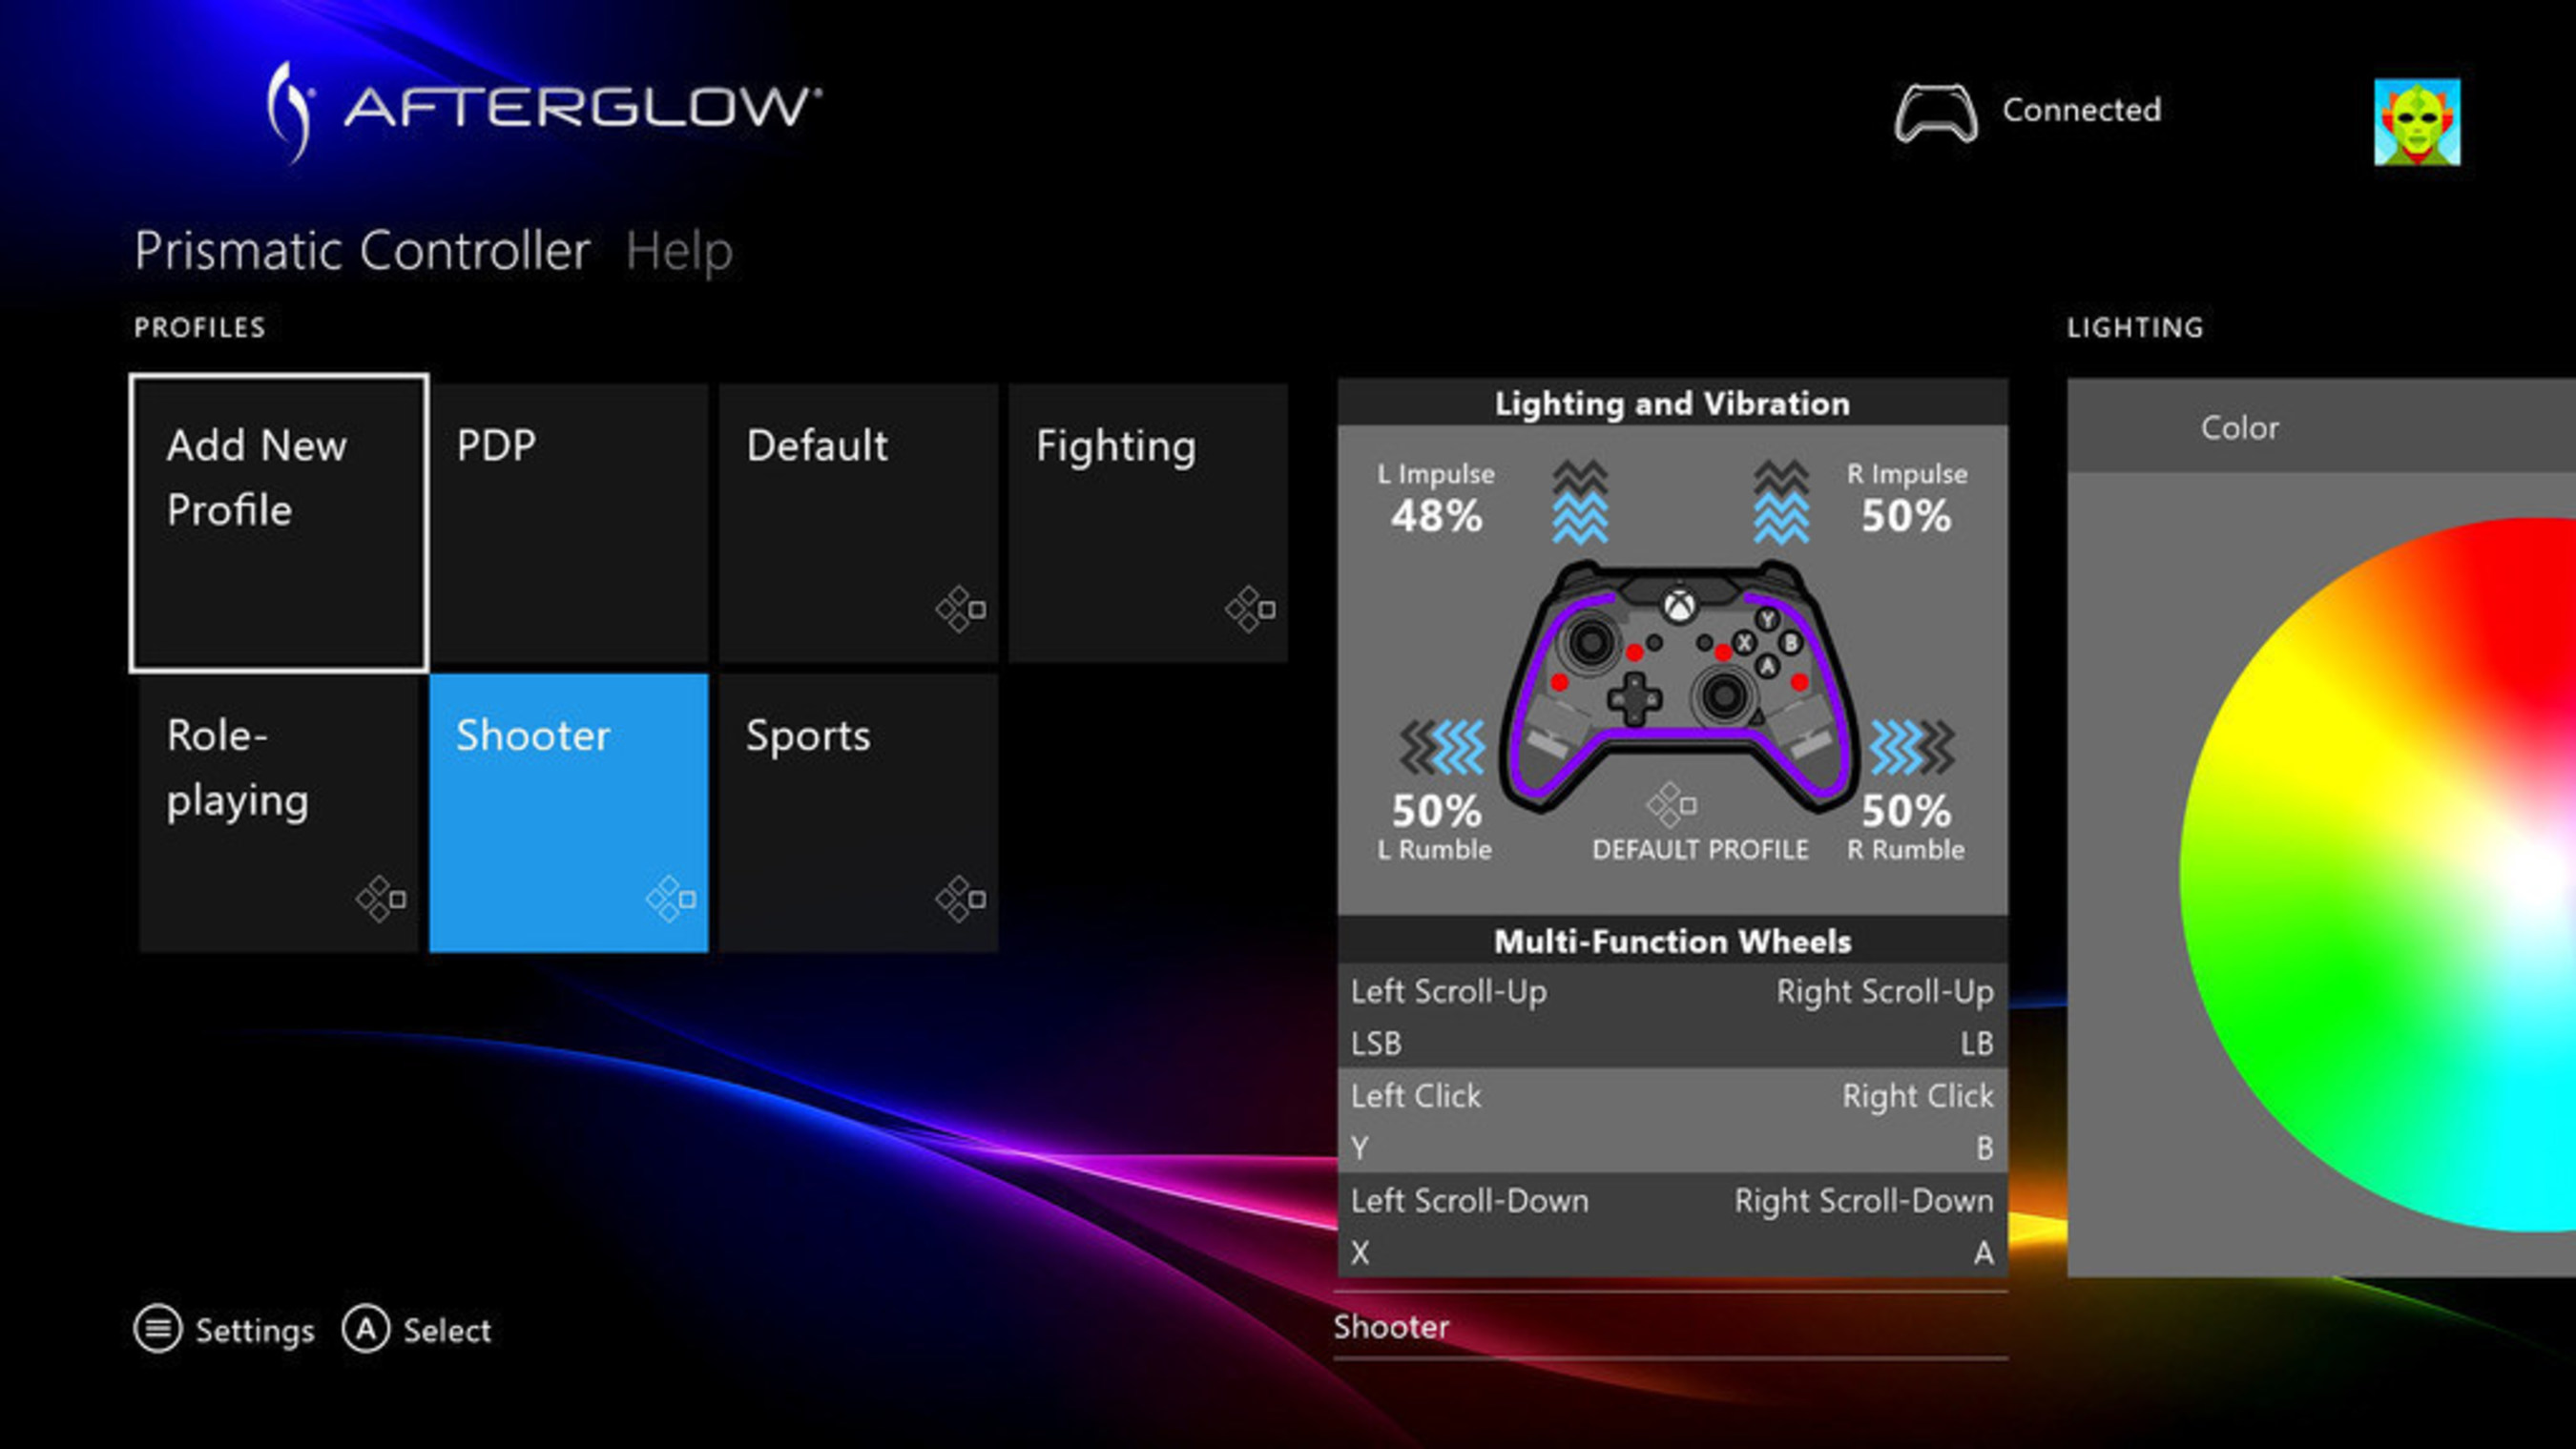 Launching May 3, PDP's Free Afterglow Prismatic Controller Configuration App for Xbox One Gives Gamers the Power to Create Unique Controller Profiles for Any Game.